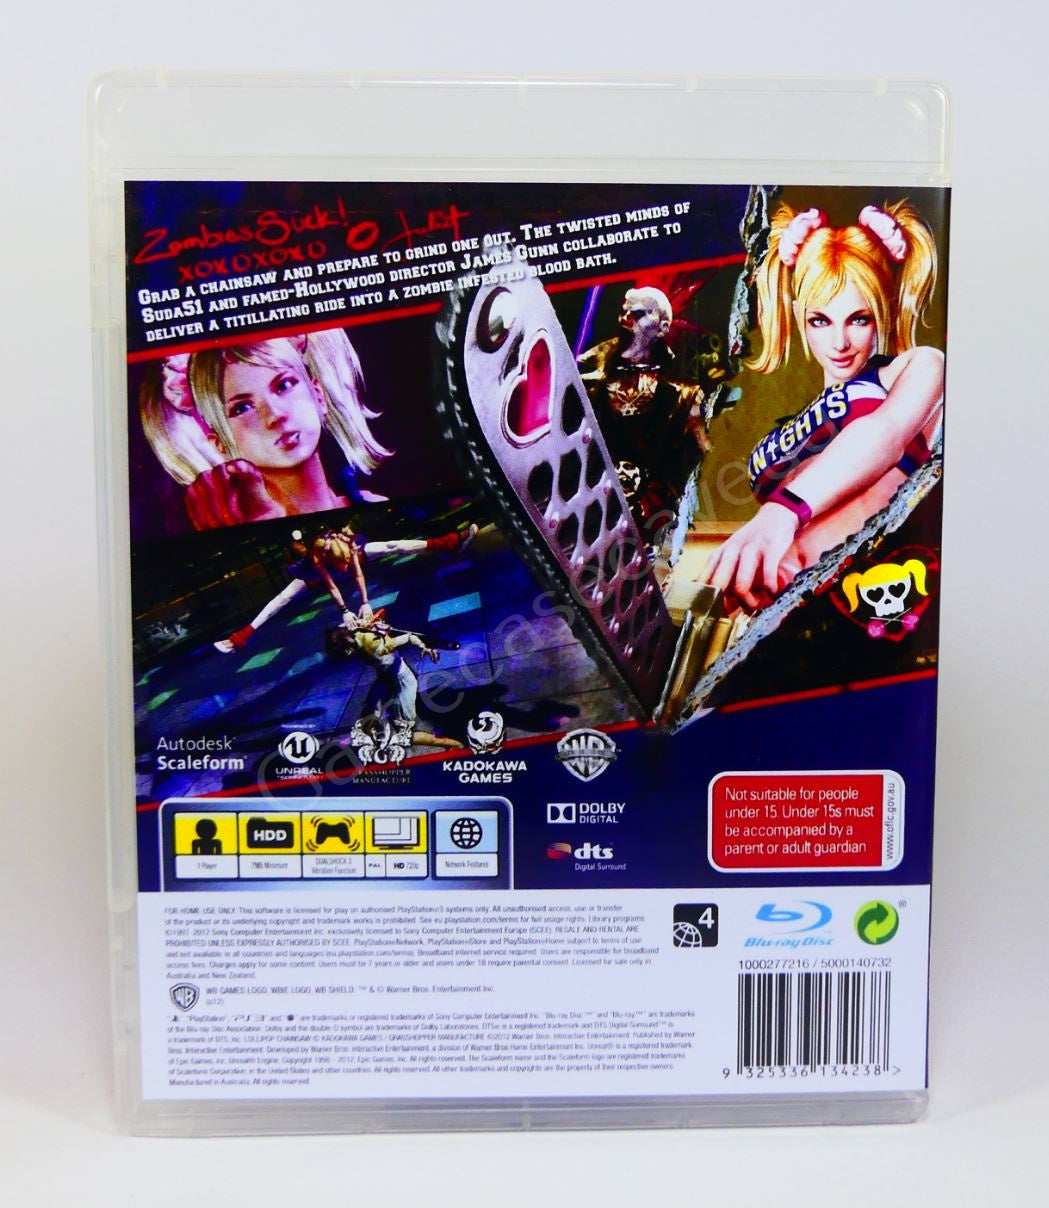 Lollipop Chainsaw - PS3 Replacement Case